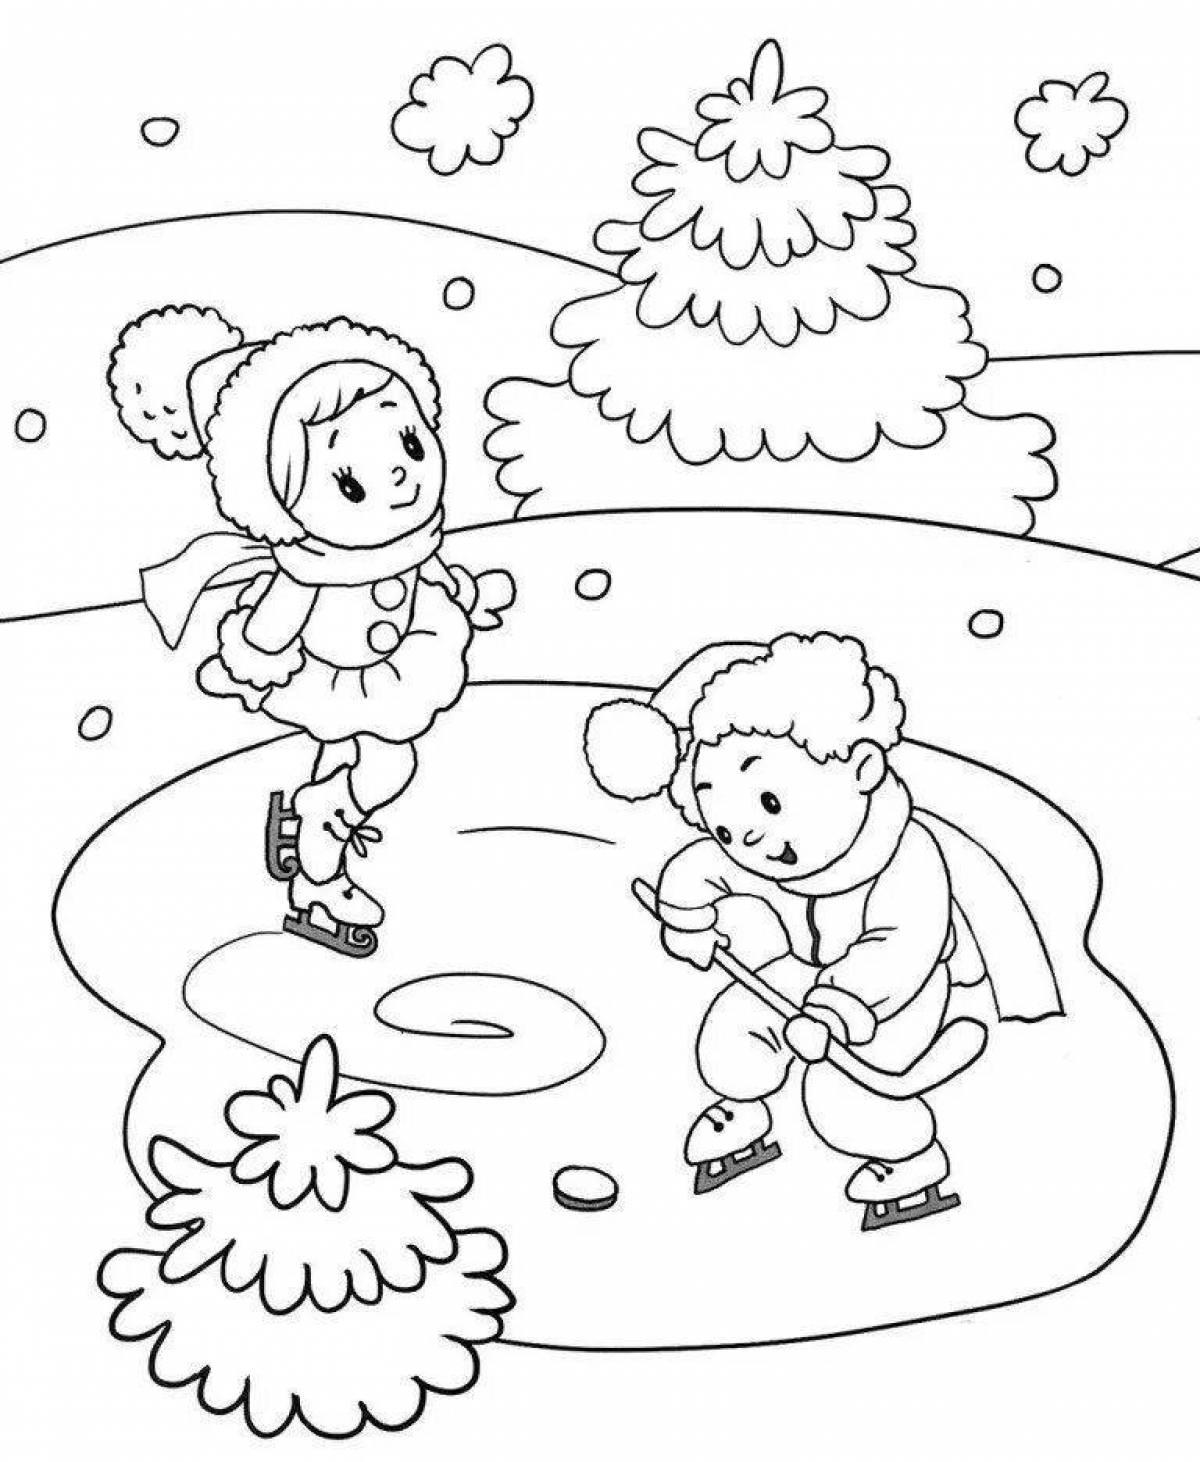 Merry winter coloring book for children 2-3 years old